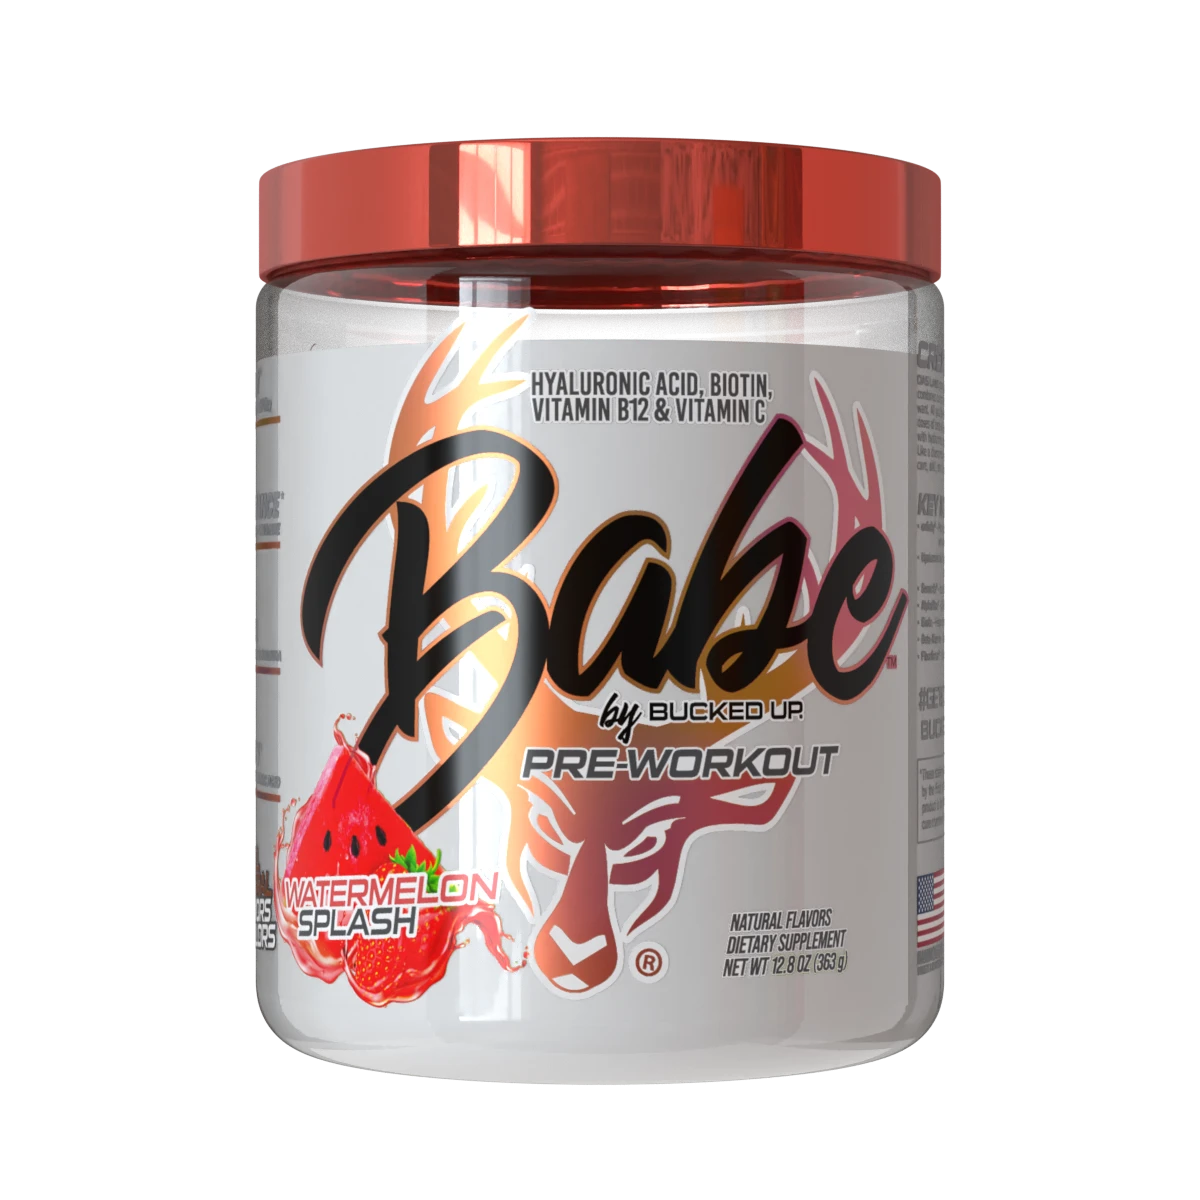 Babe Pre-Workout by Bucked Up